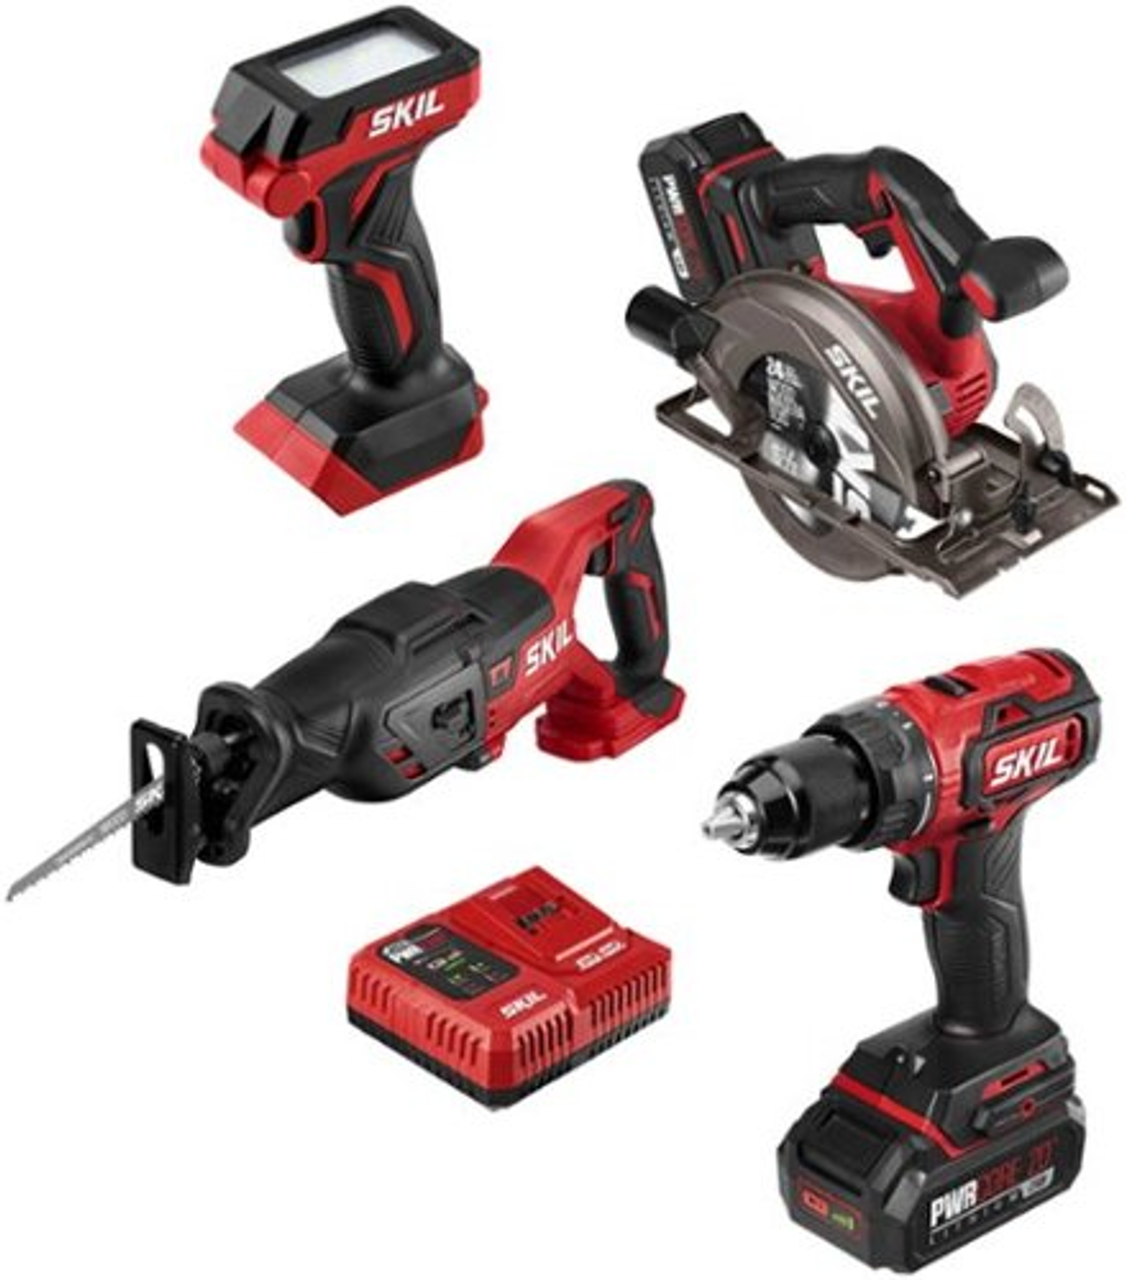 Skil - PWR CORE 20™ Brushless 20V 4-Tool Kit: Drill Driver, Reciprocating Saw, Circular Saw and LED Light - Red/Black